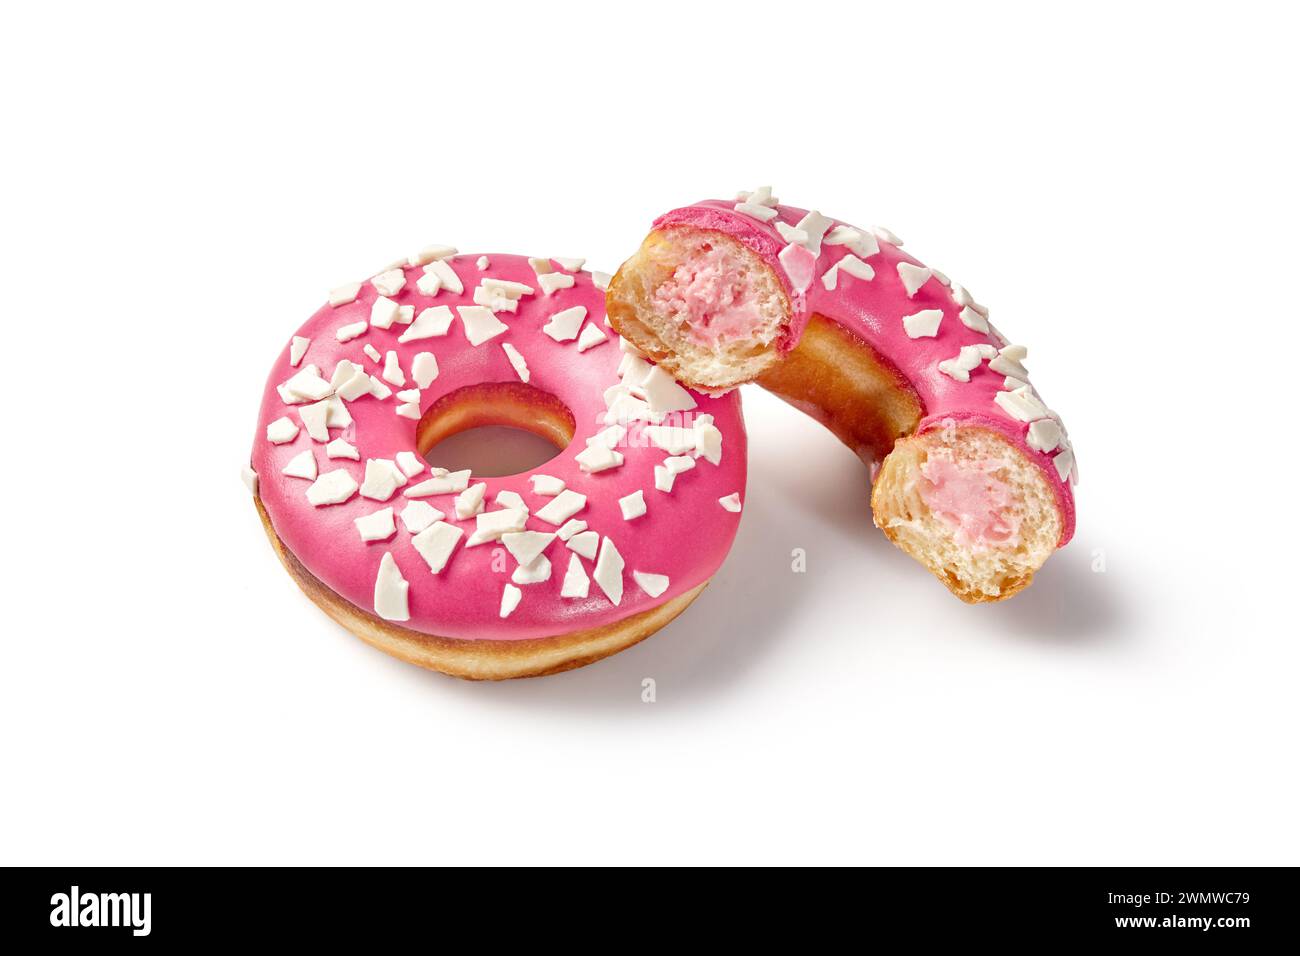 Appetizing soft fluffy donuts with creamy berry filling and vibrant pink icing sprinkled with white chocolate chips. Popular confectionery Stock Photo